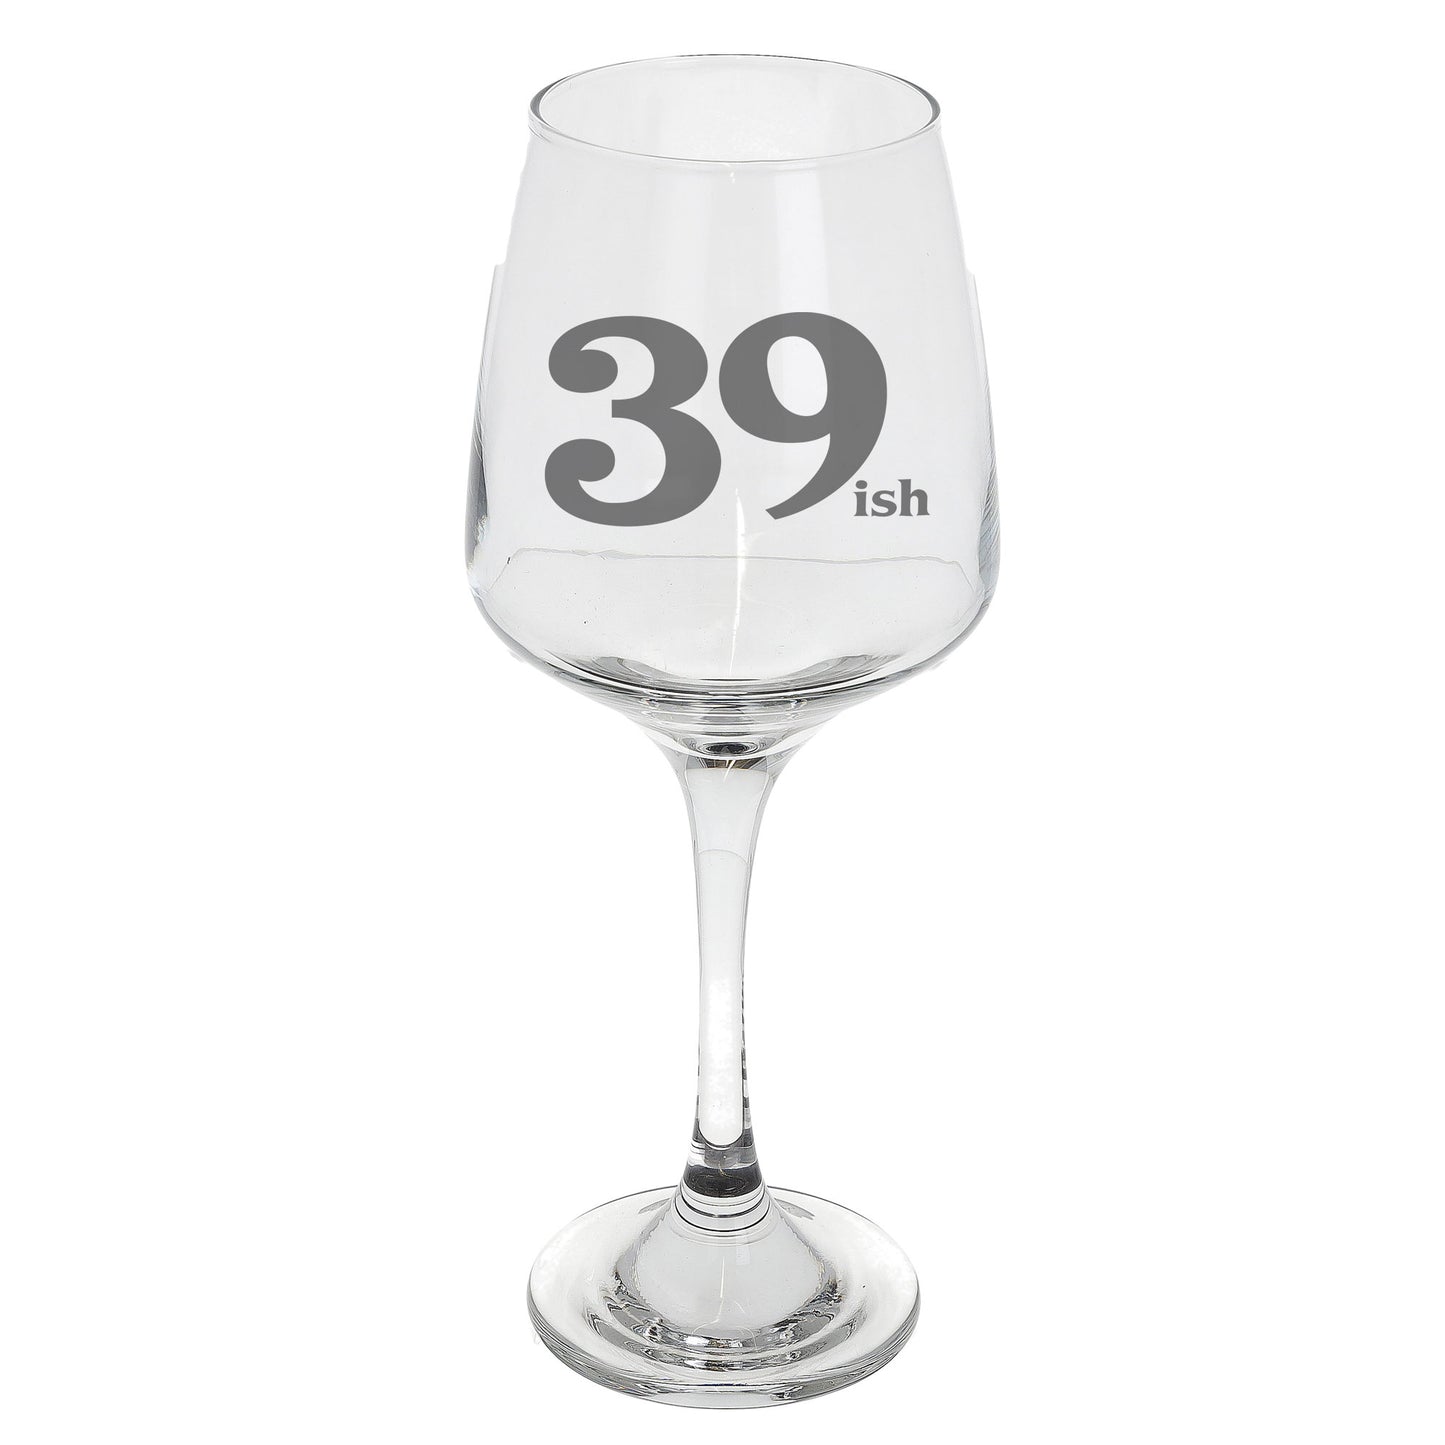 39ish Wine Glass and/or Coaster Set  - Always Looking Good - Wine Glass On Its Own  